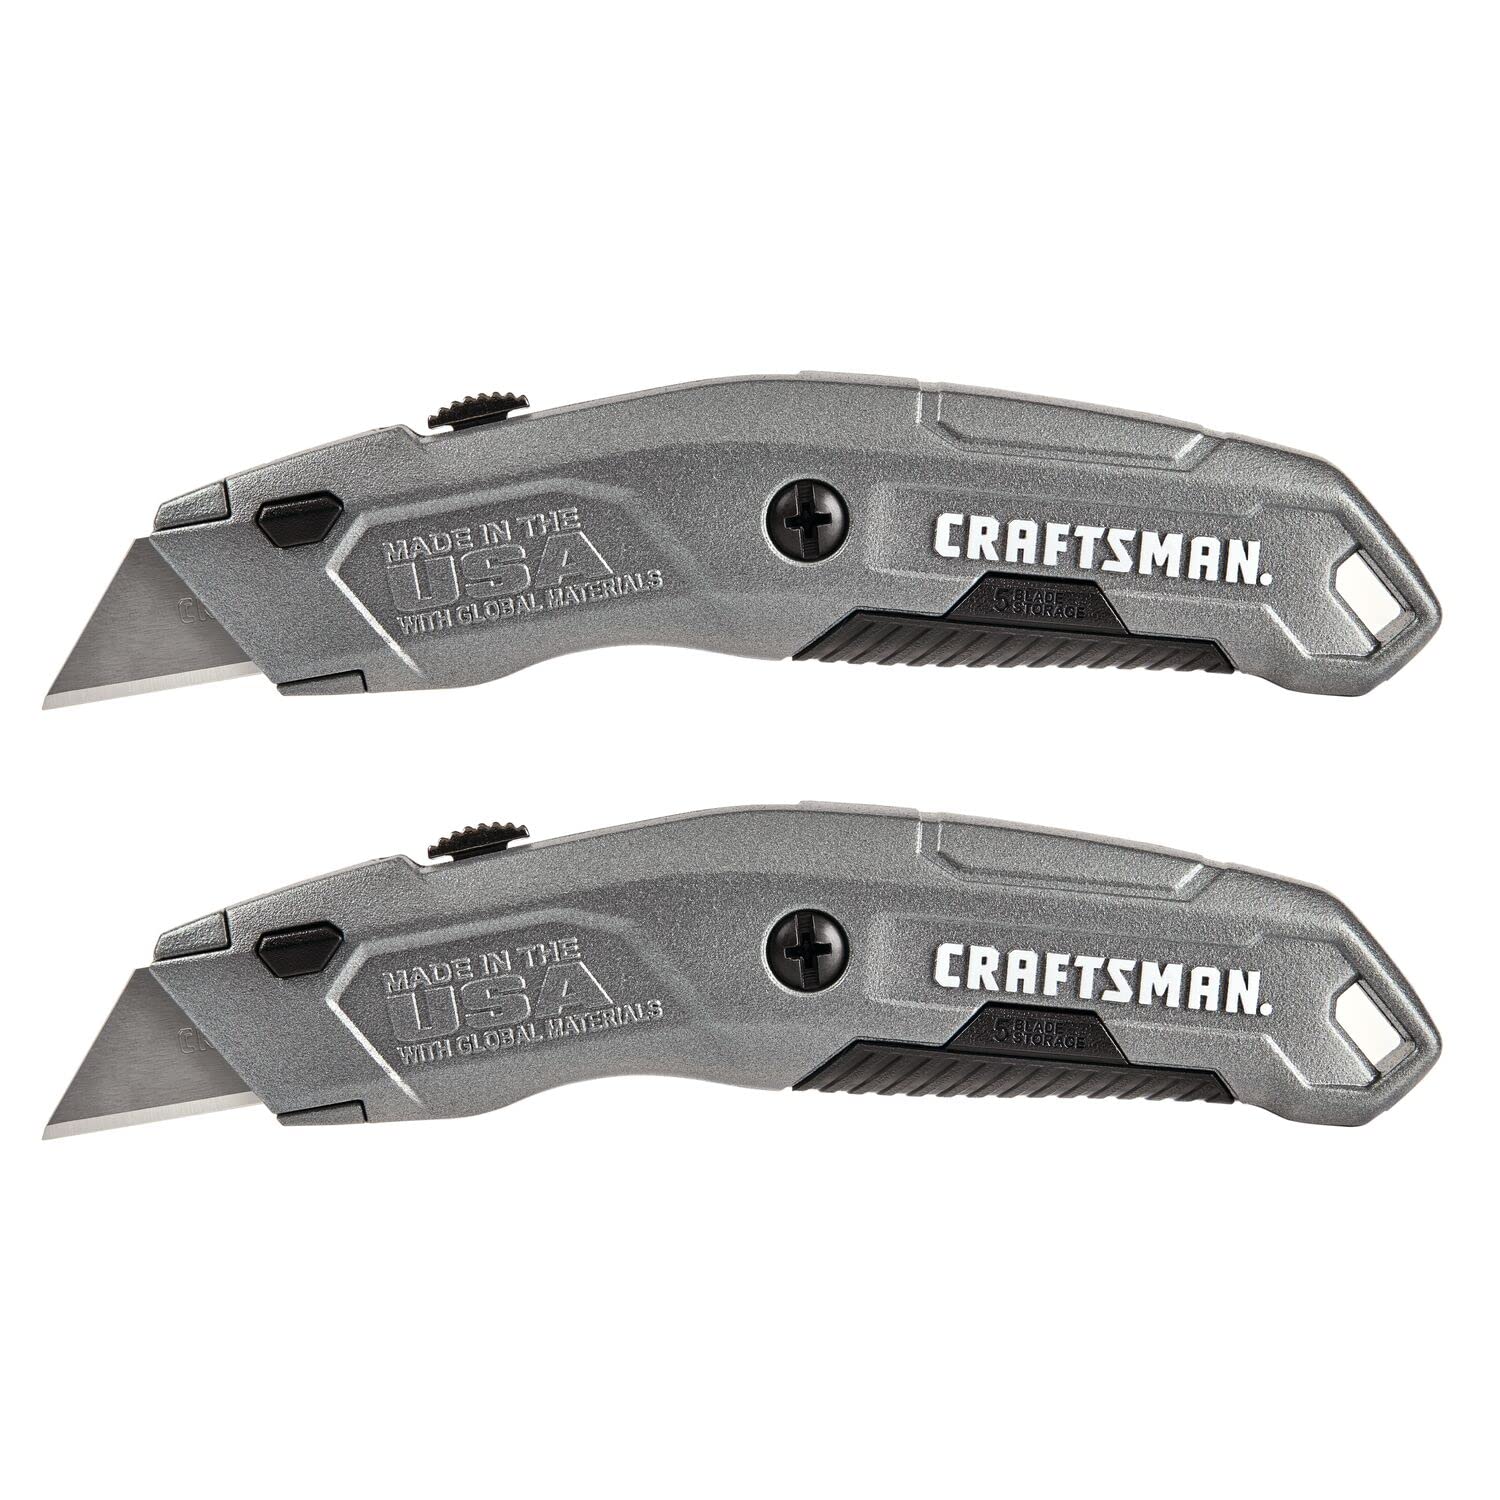 CRAFTSMAN Utility Knife, Quick Change, Retractable, 6 Blade, 2-Pack (CMHT10588)